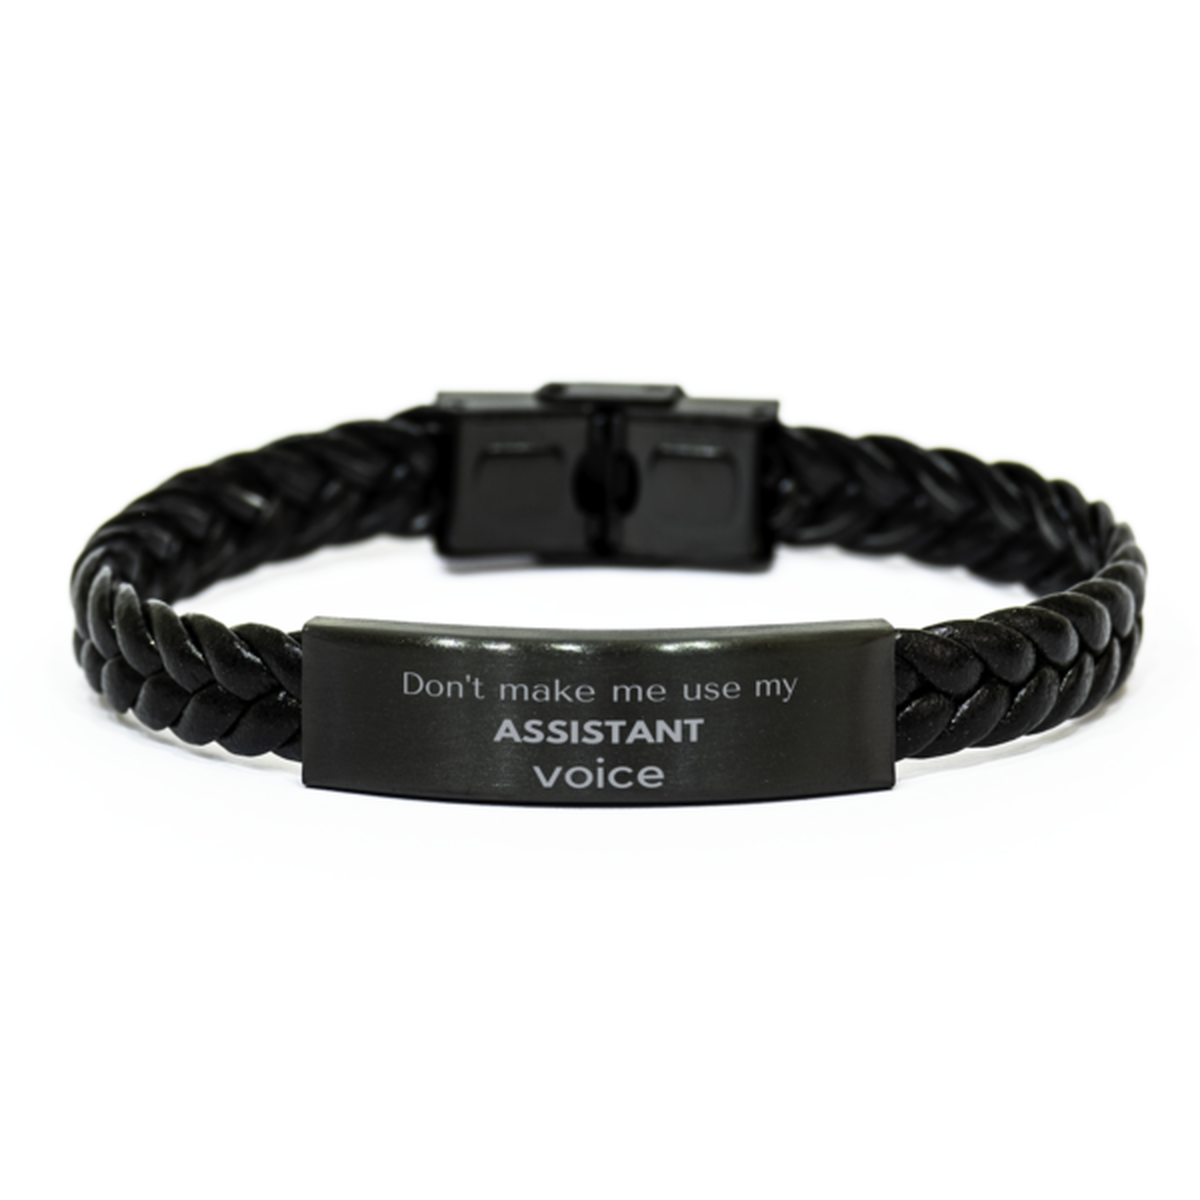 Don't make me use my Assistant voice, Sarcasm Assistant Gifts, Christmas Assistant Braided Leather Bracelet Birthday Unique Gifts For Assistant Coworkers, Men, Women, Colleague, Friends